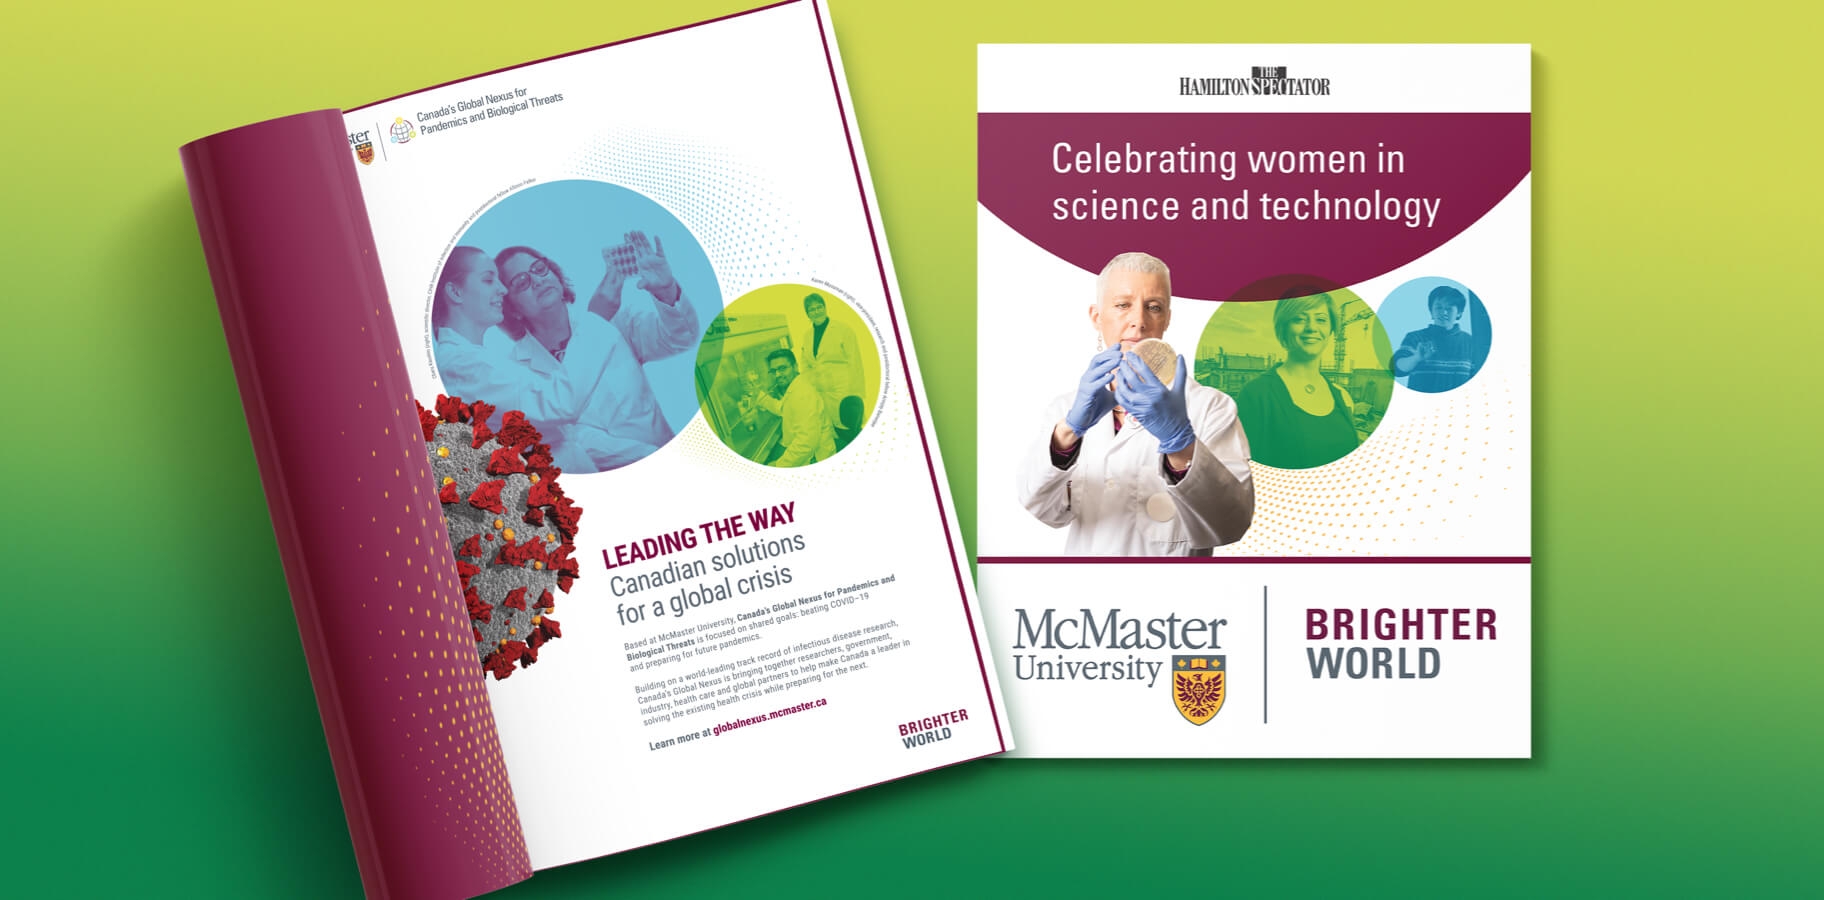 Print ad campaigns Elite Digital created for McMaster University.